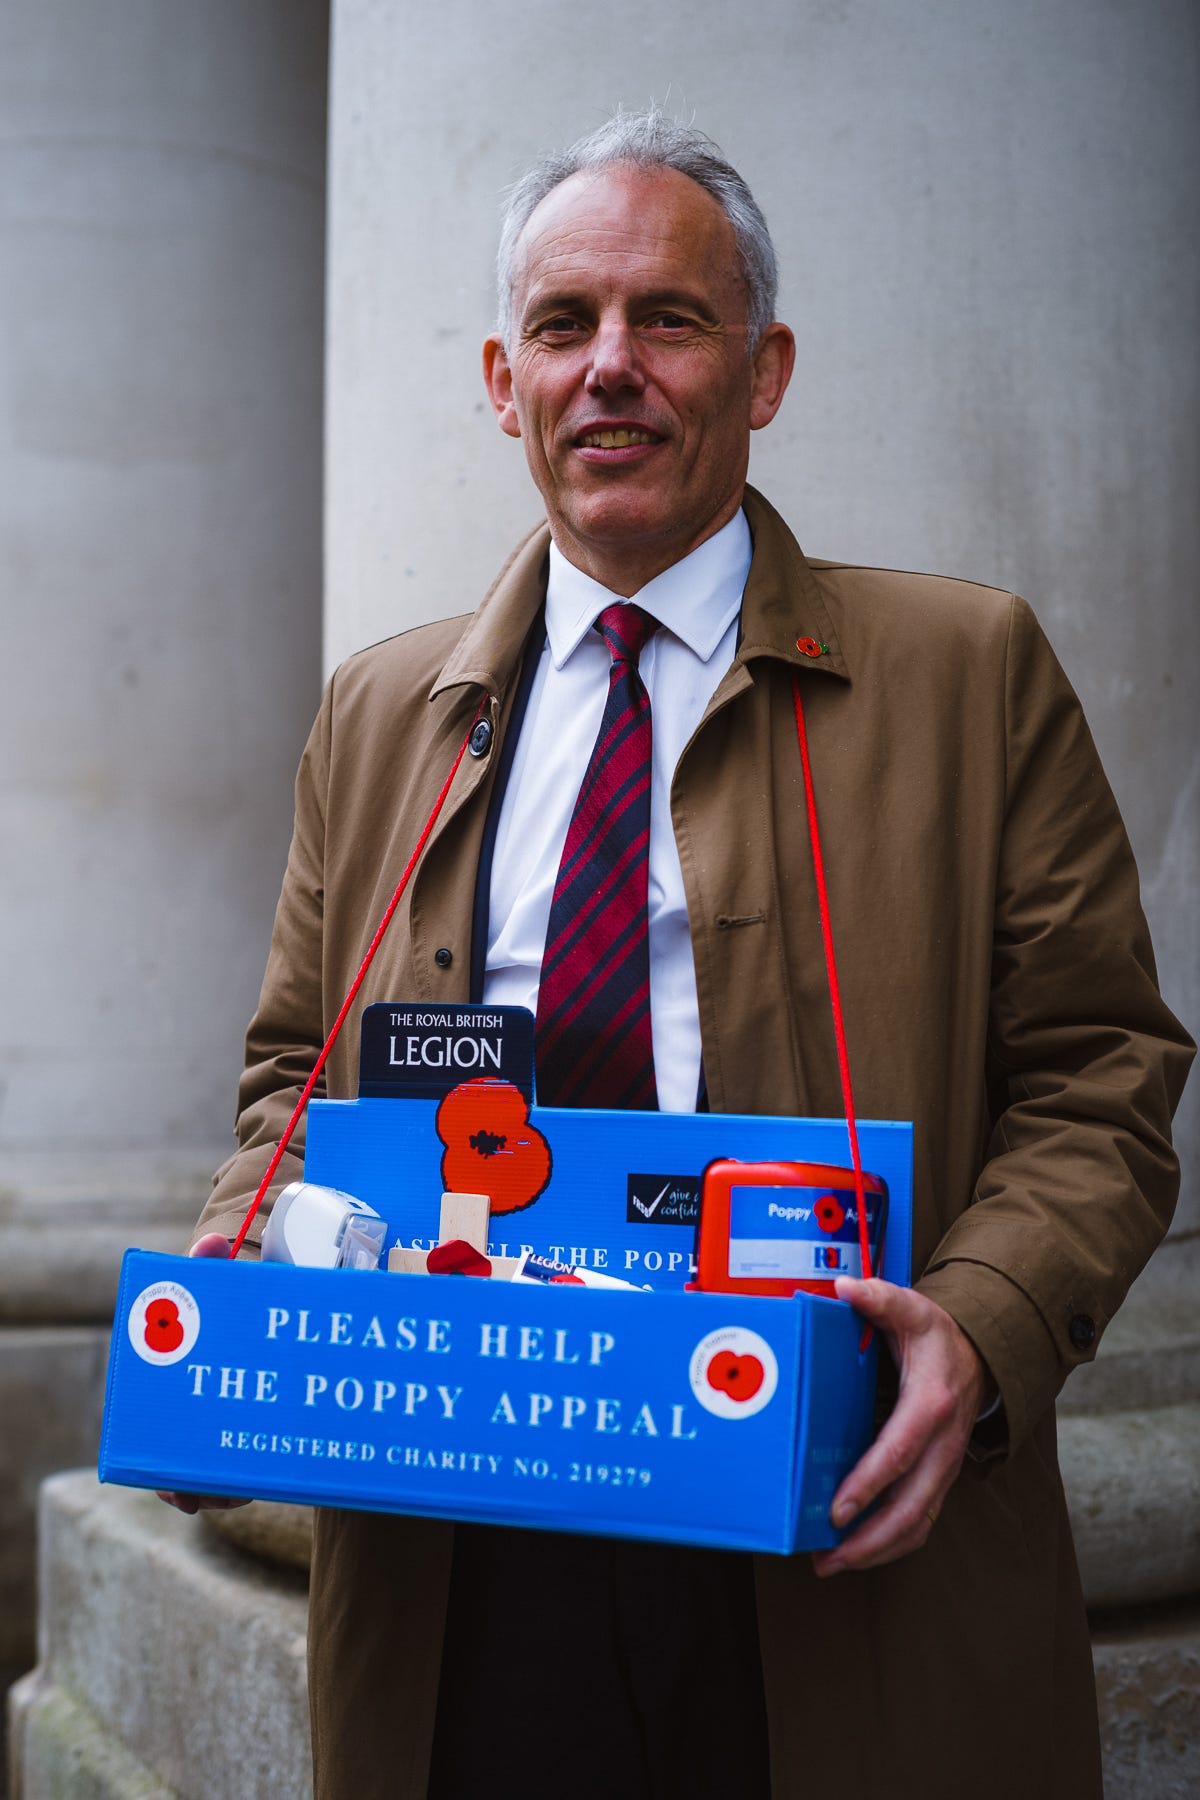 Portrait of a caucasian man with gray hair in a white shirt, red and navy tie and tan trenchcoat asking for donations for the veterans poppy appeal